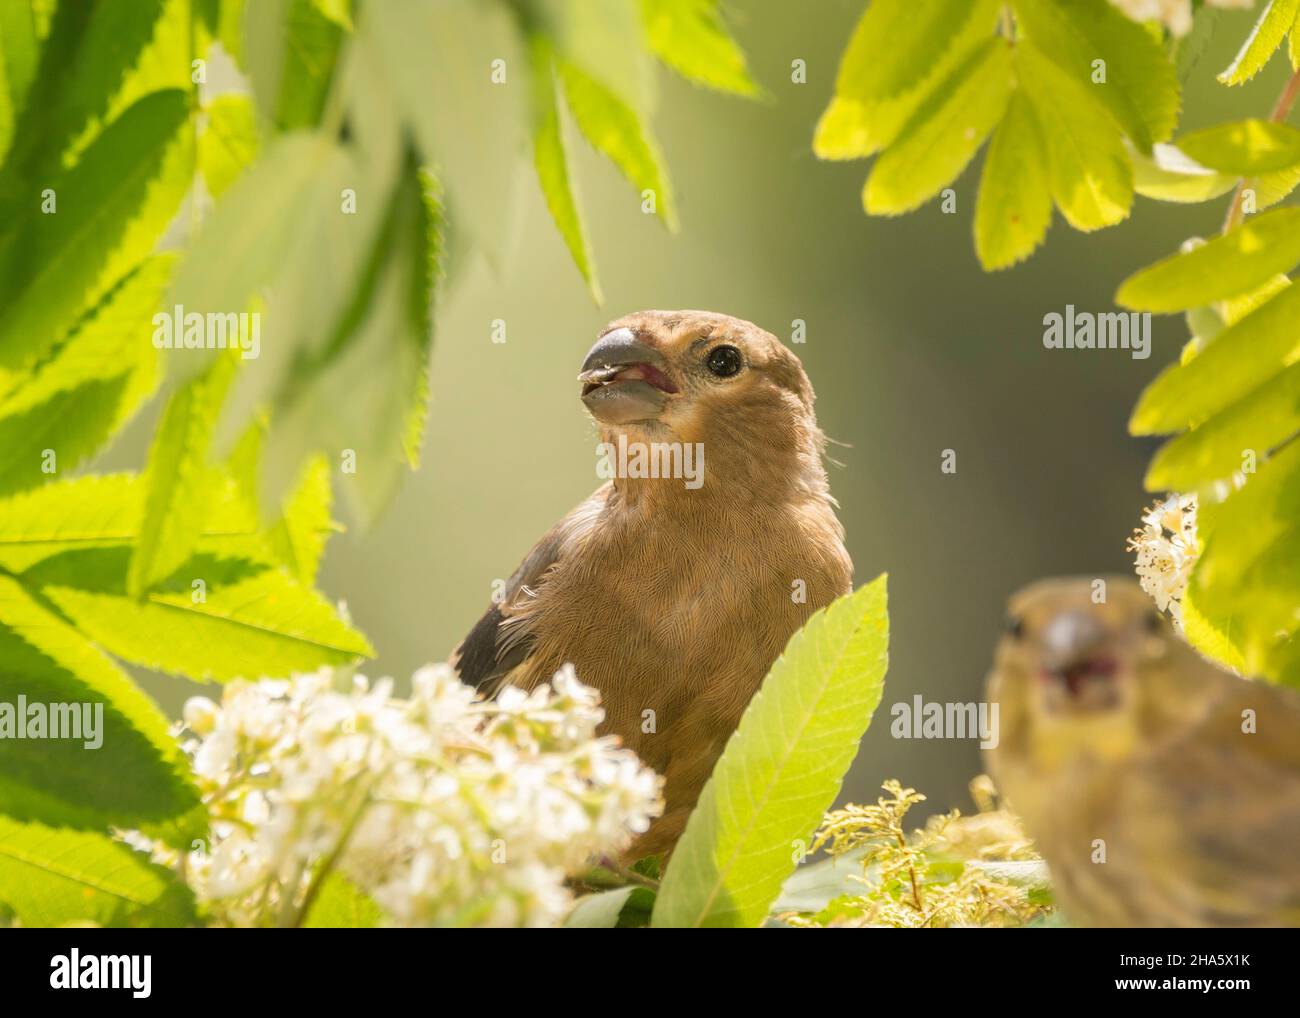 close up of young bullfinch standing between flowers and leaves Stock Photo